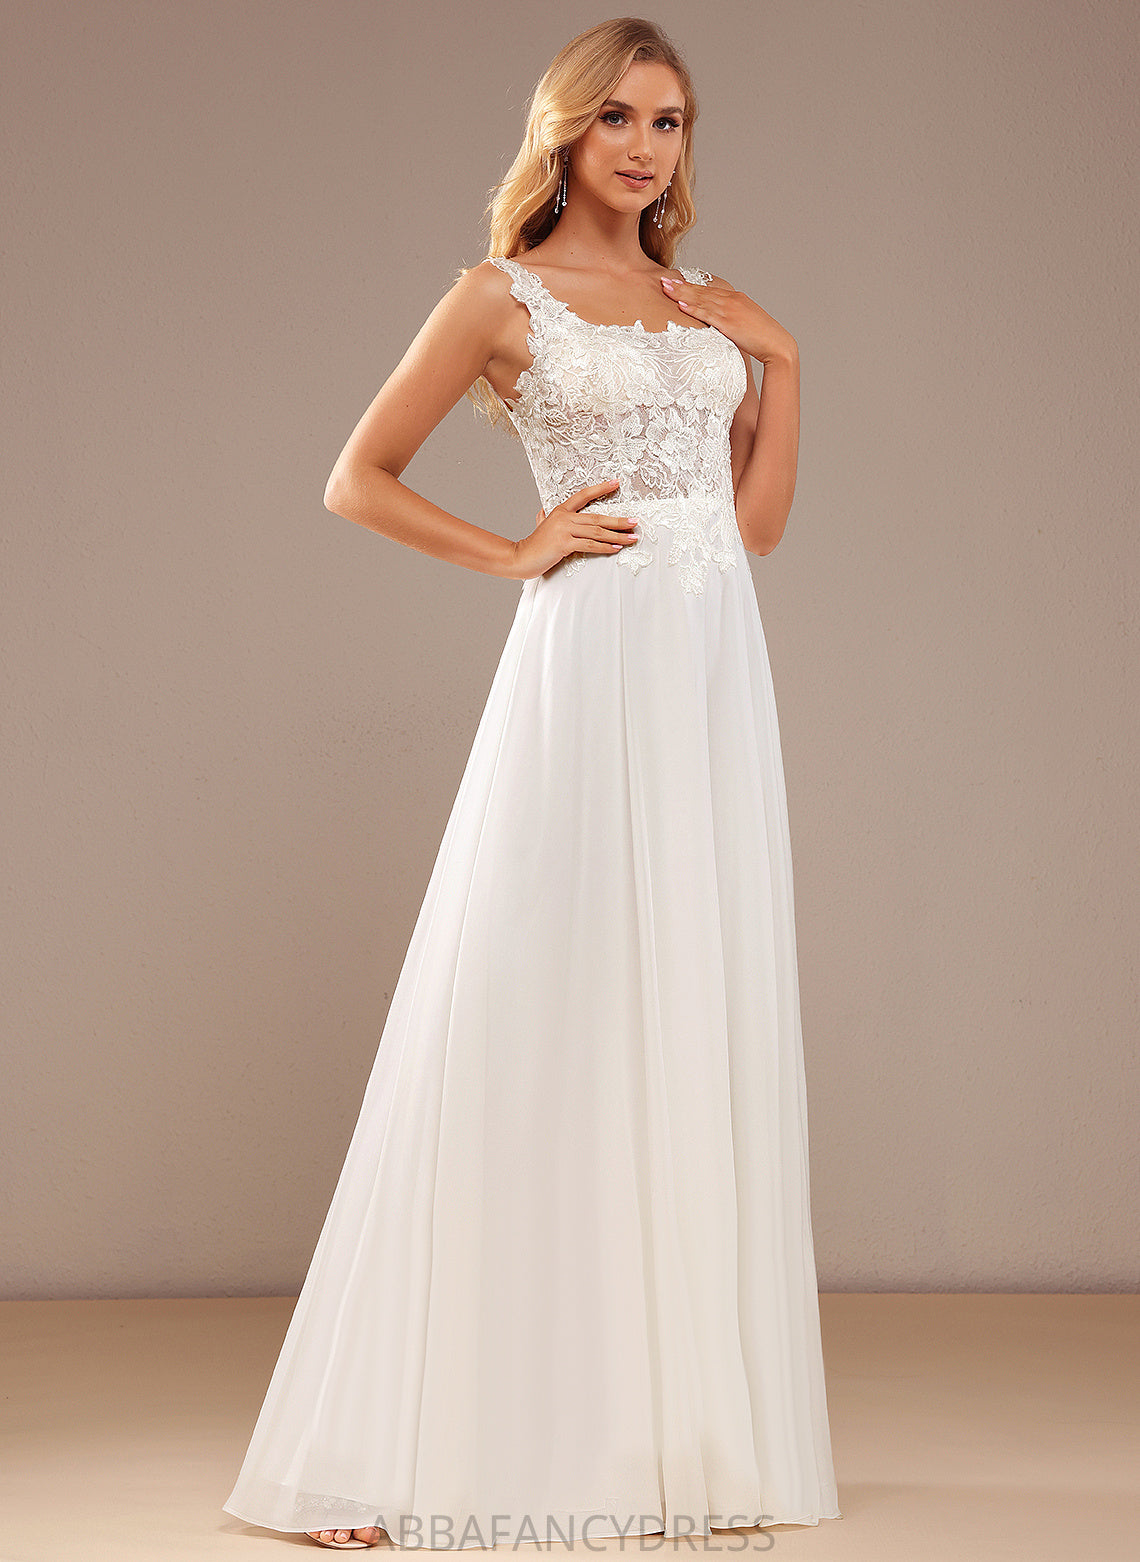 Lace Wedding Sequins A-Line Square With Wedding Dresses Dress Floor-Length Chiffon Azul